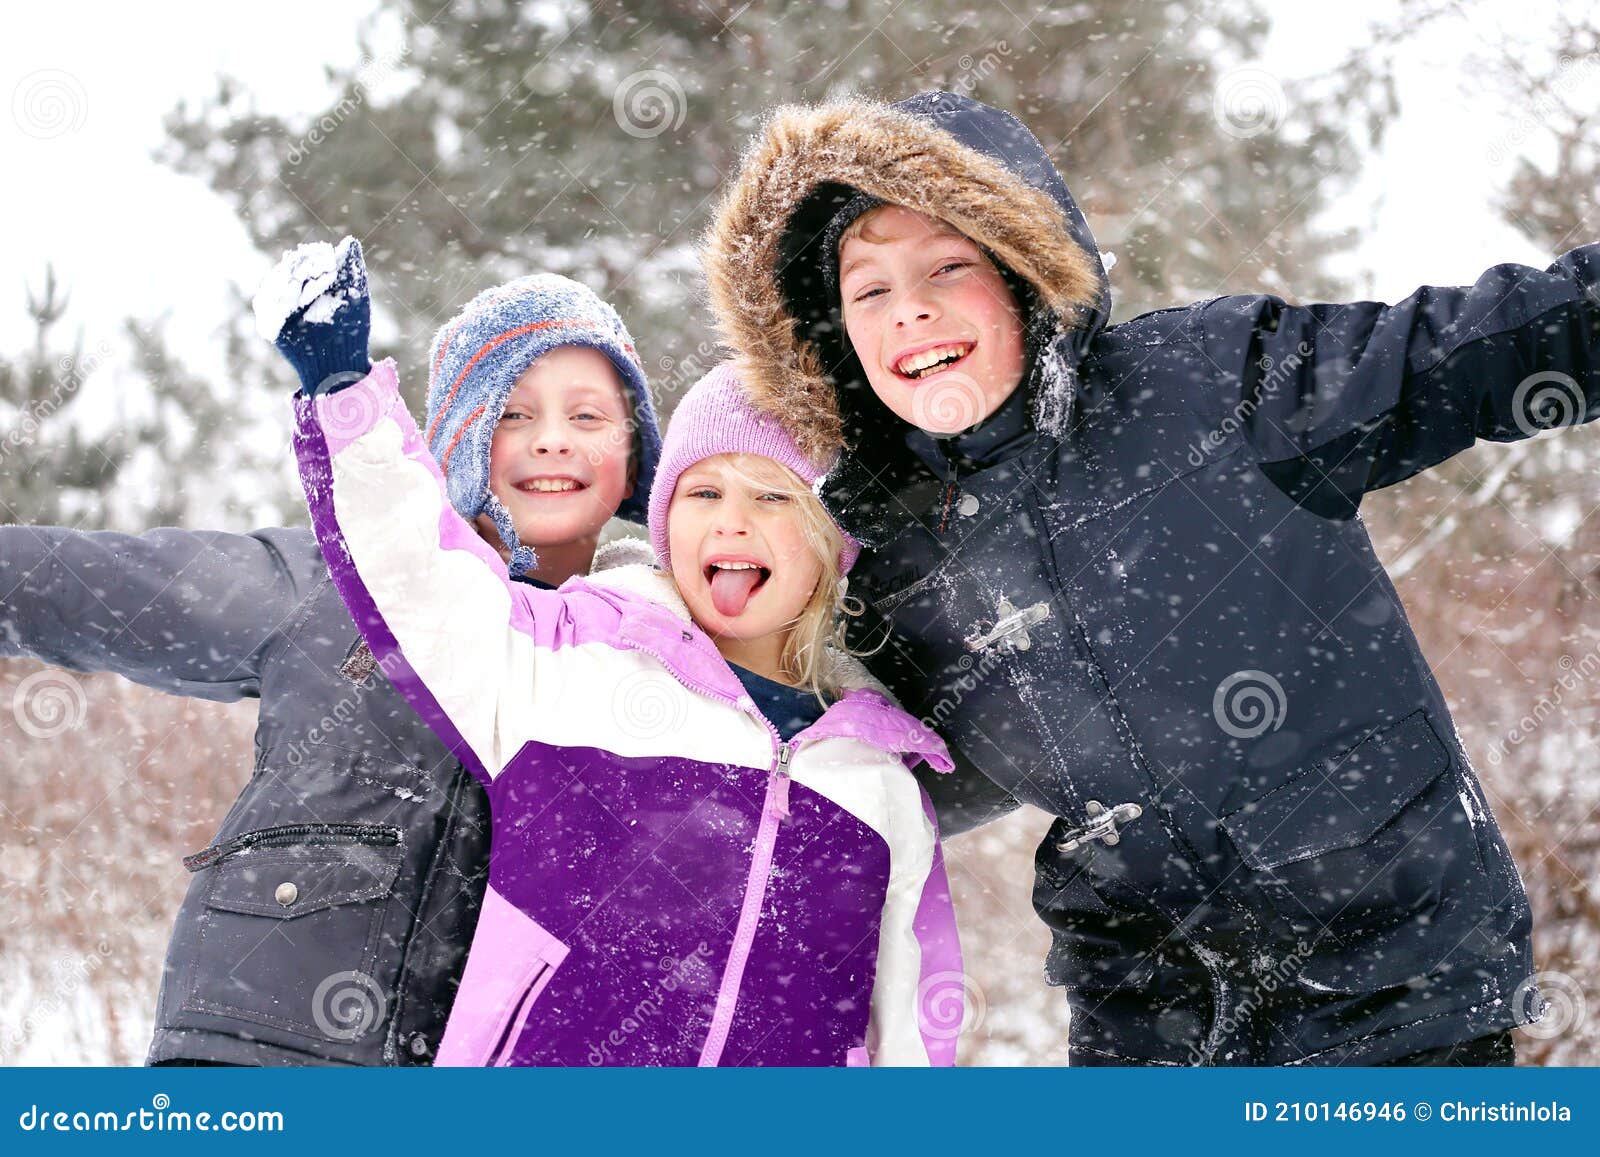 happy little kids playing outside in the winter snow